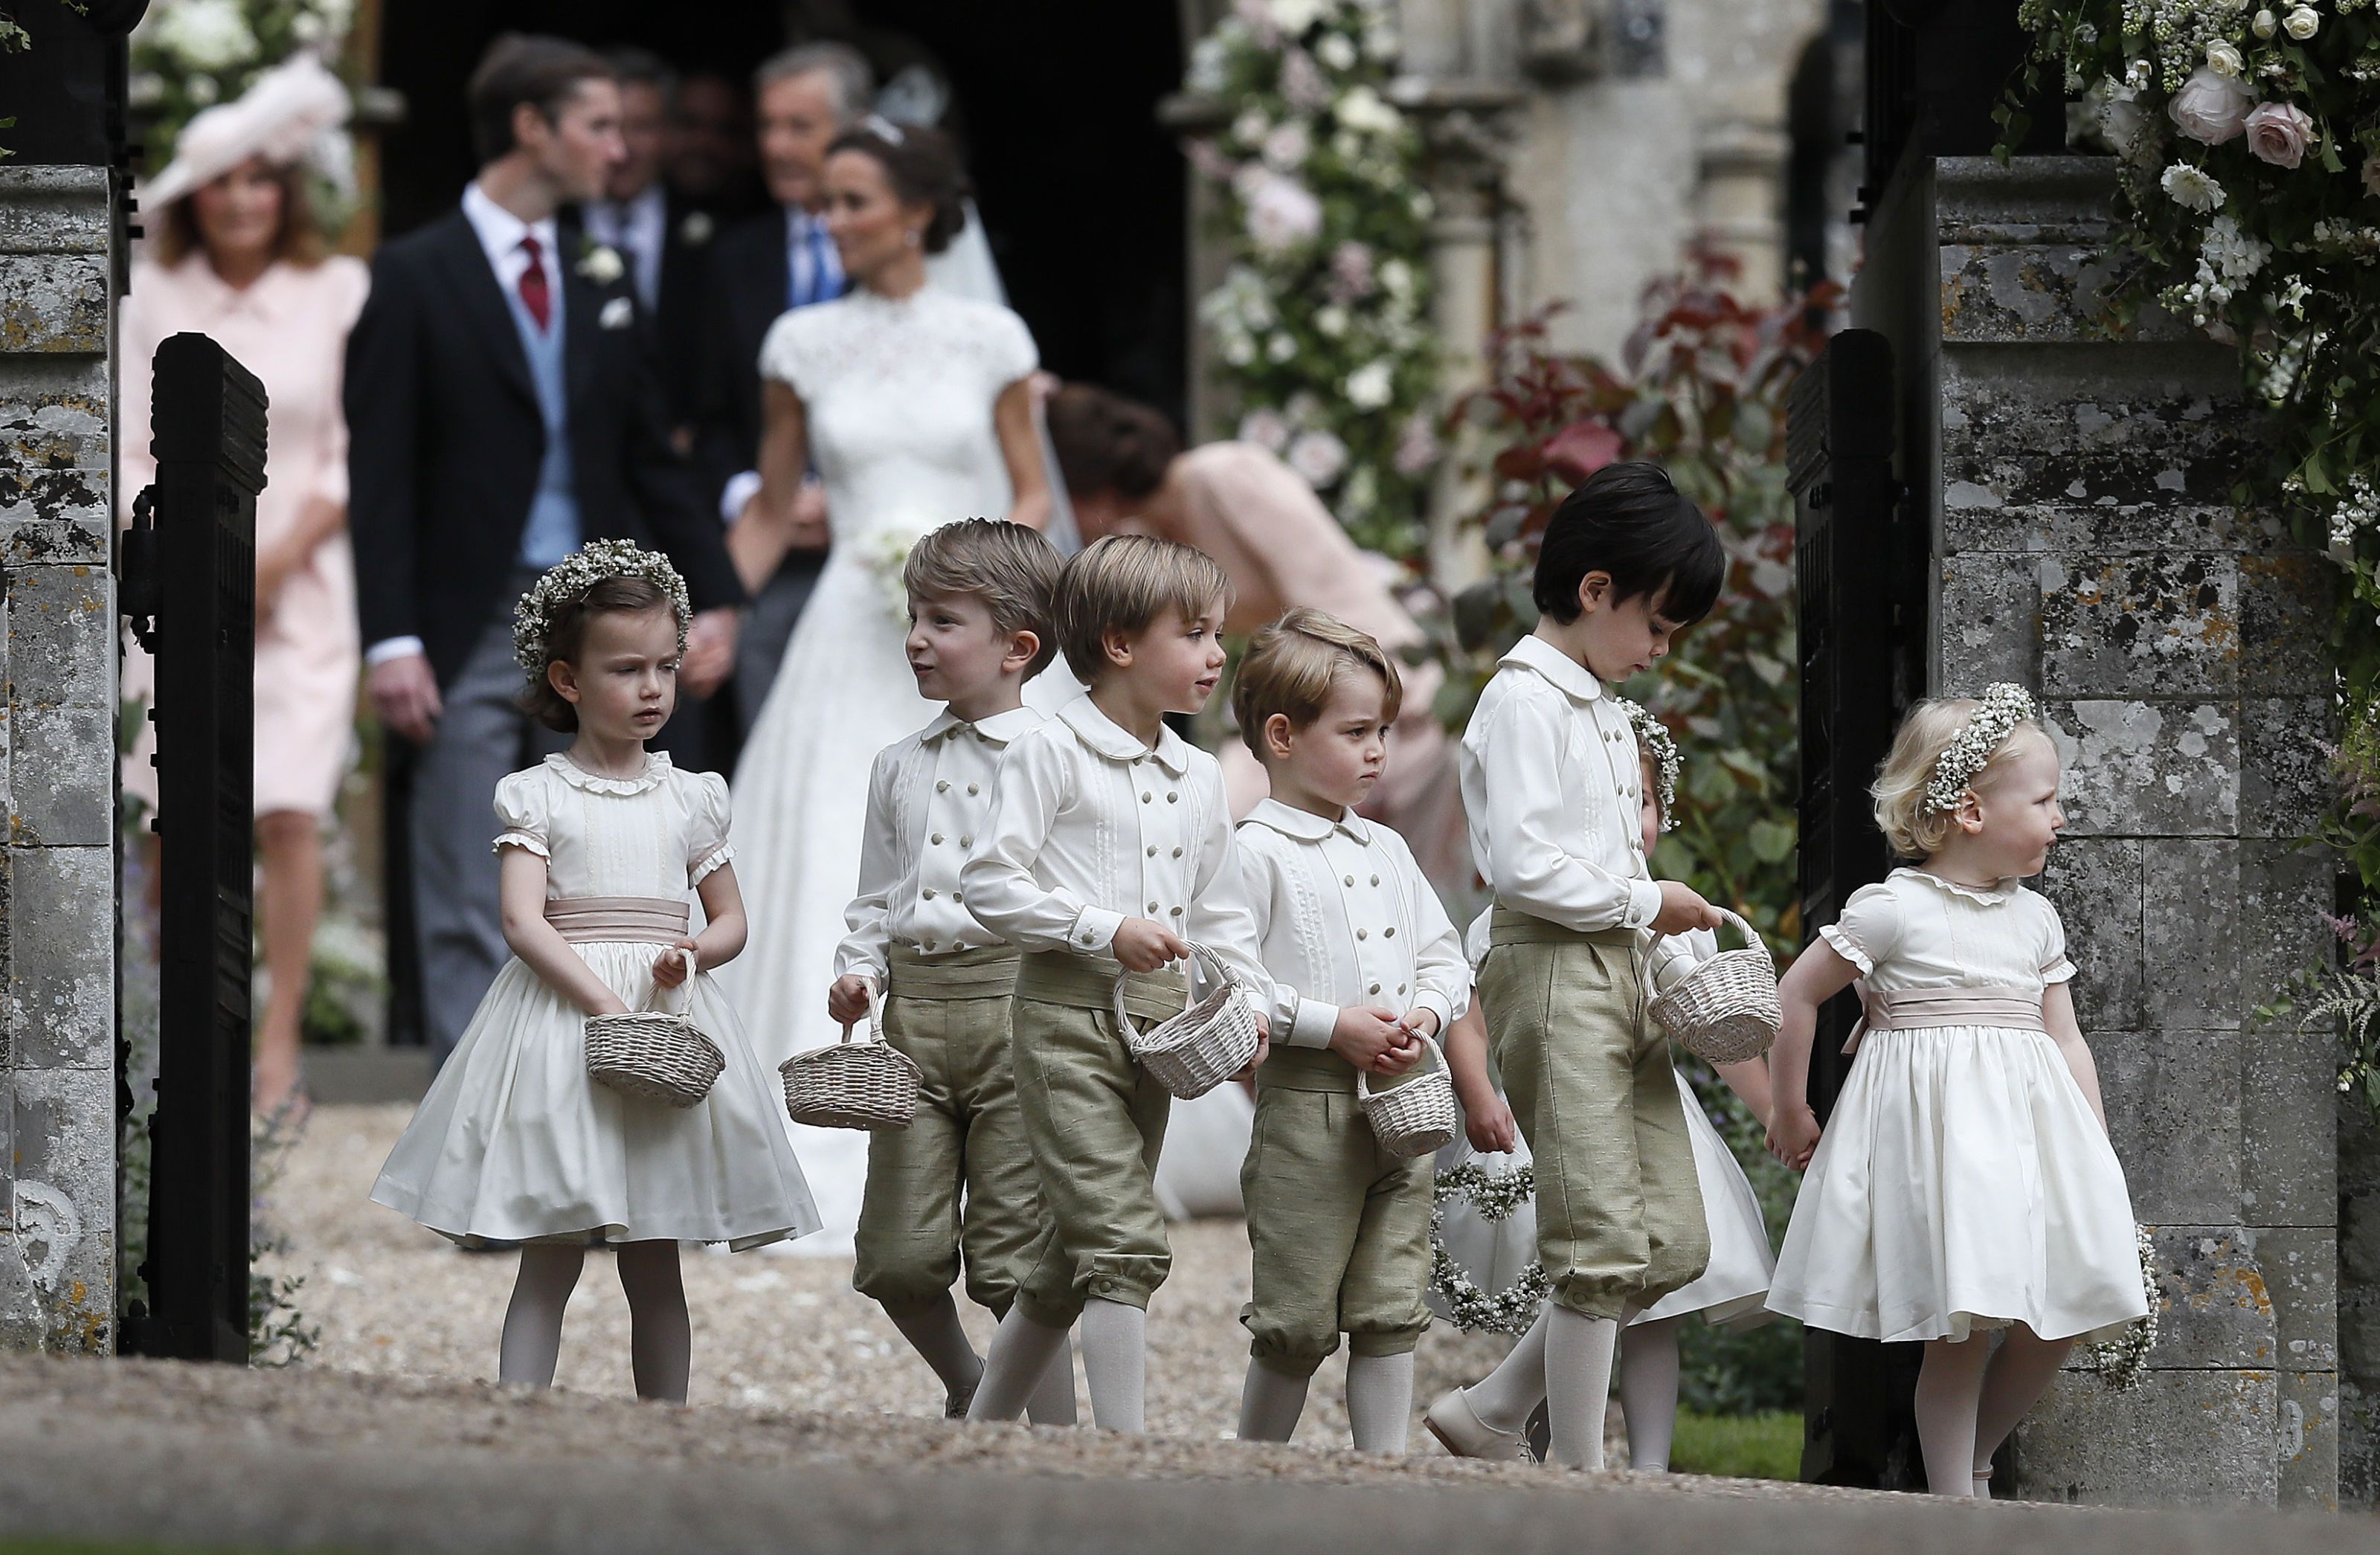 22 Etiquette Rules the Royal Family Must Follow - Parade